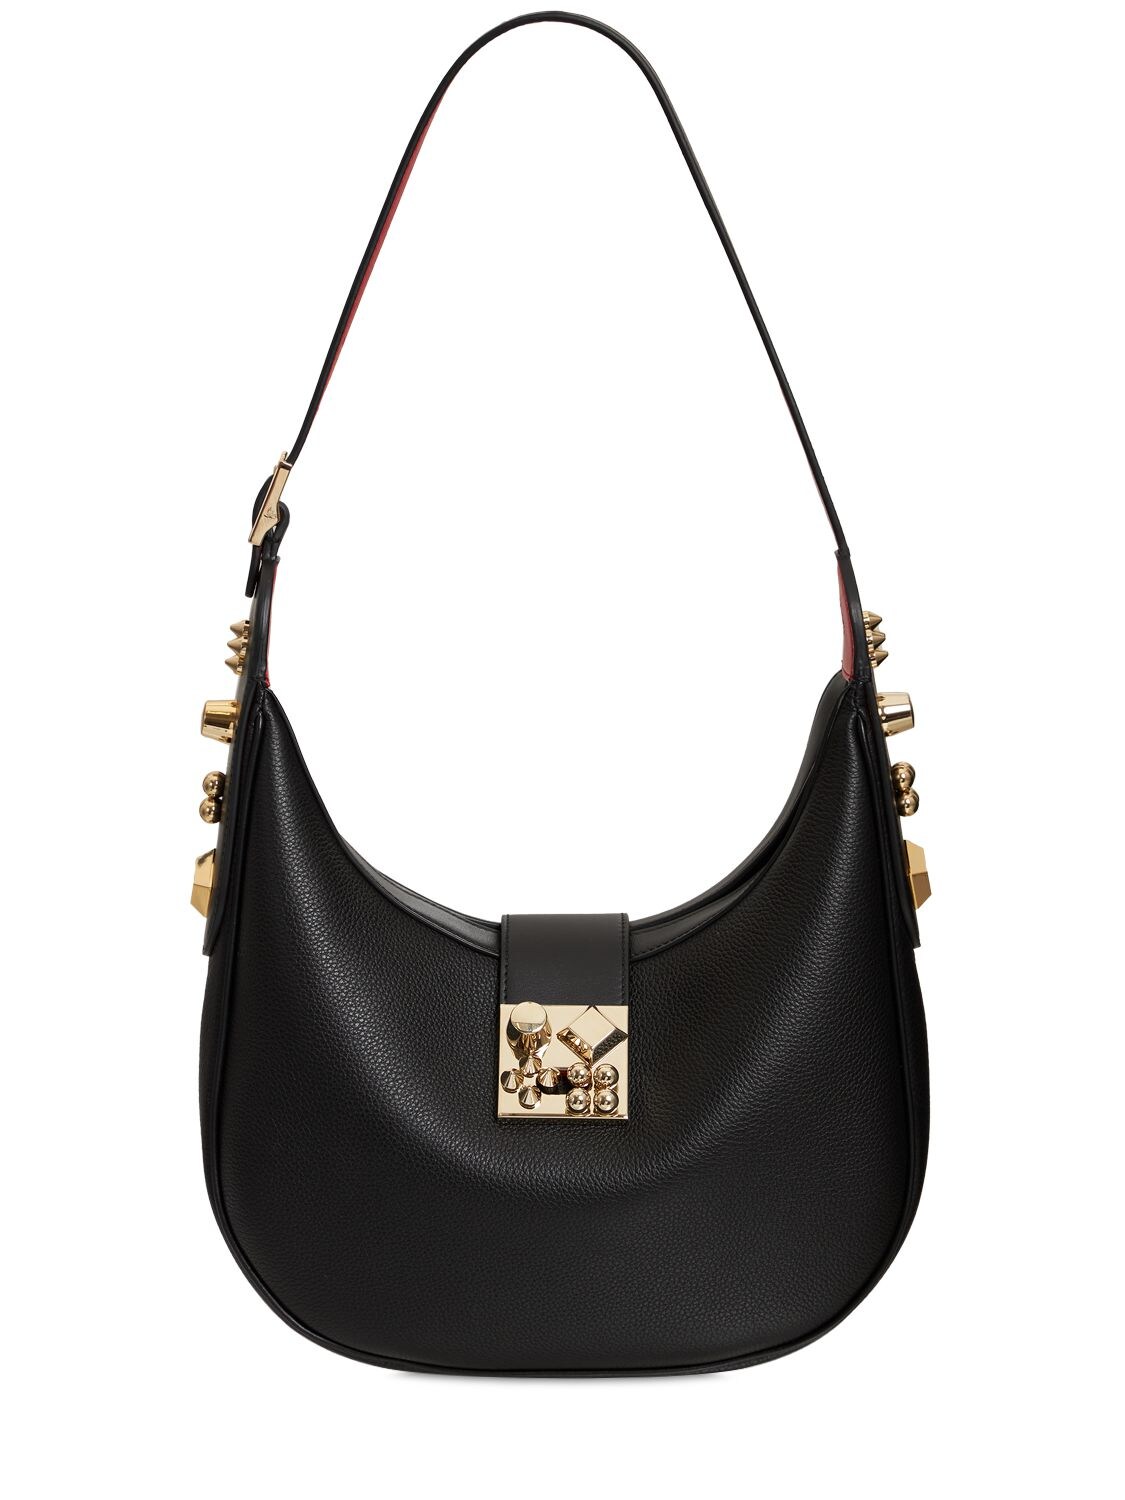 Women's CHRISTIAN LOUBOUTIN Bags On Sale, Up To 70% Off | ModeSens